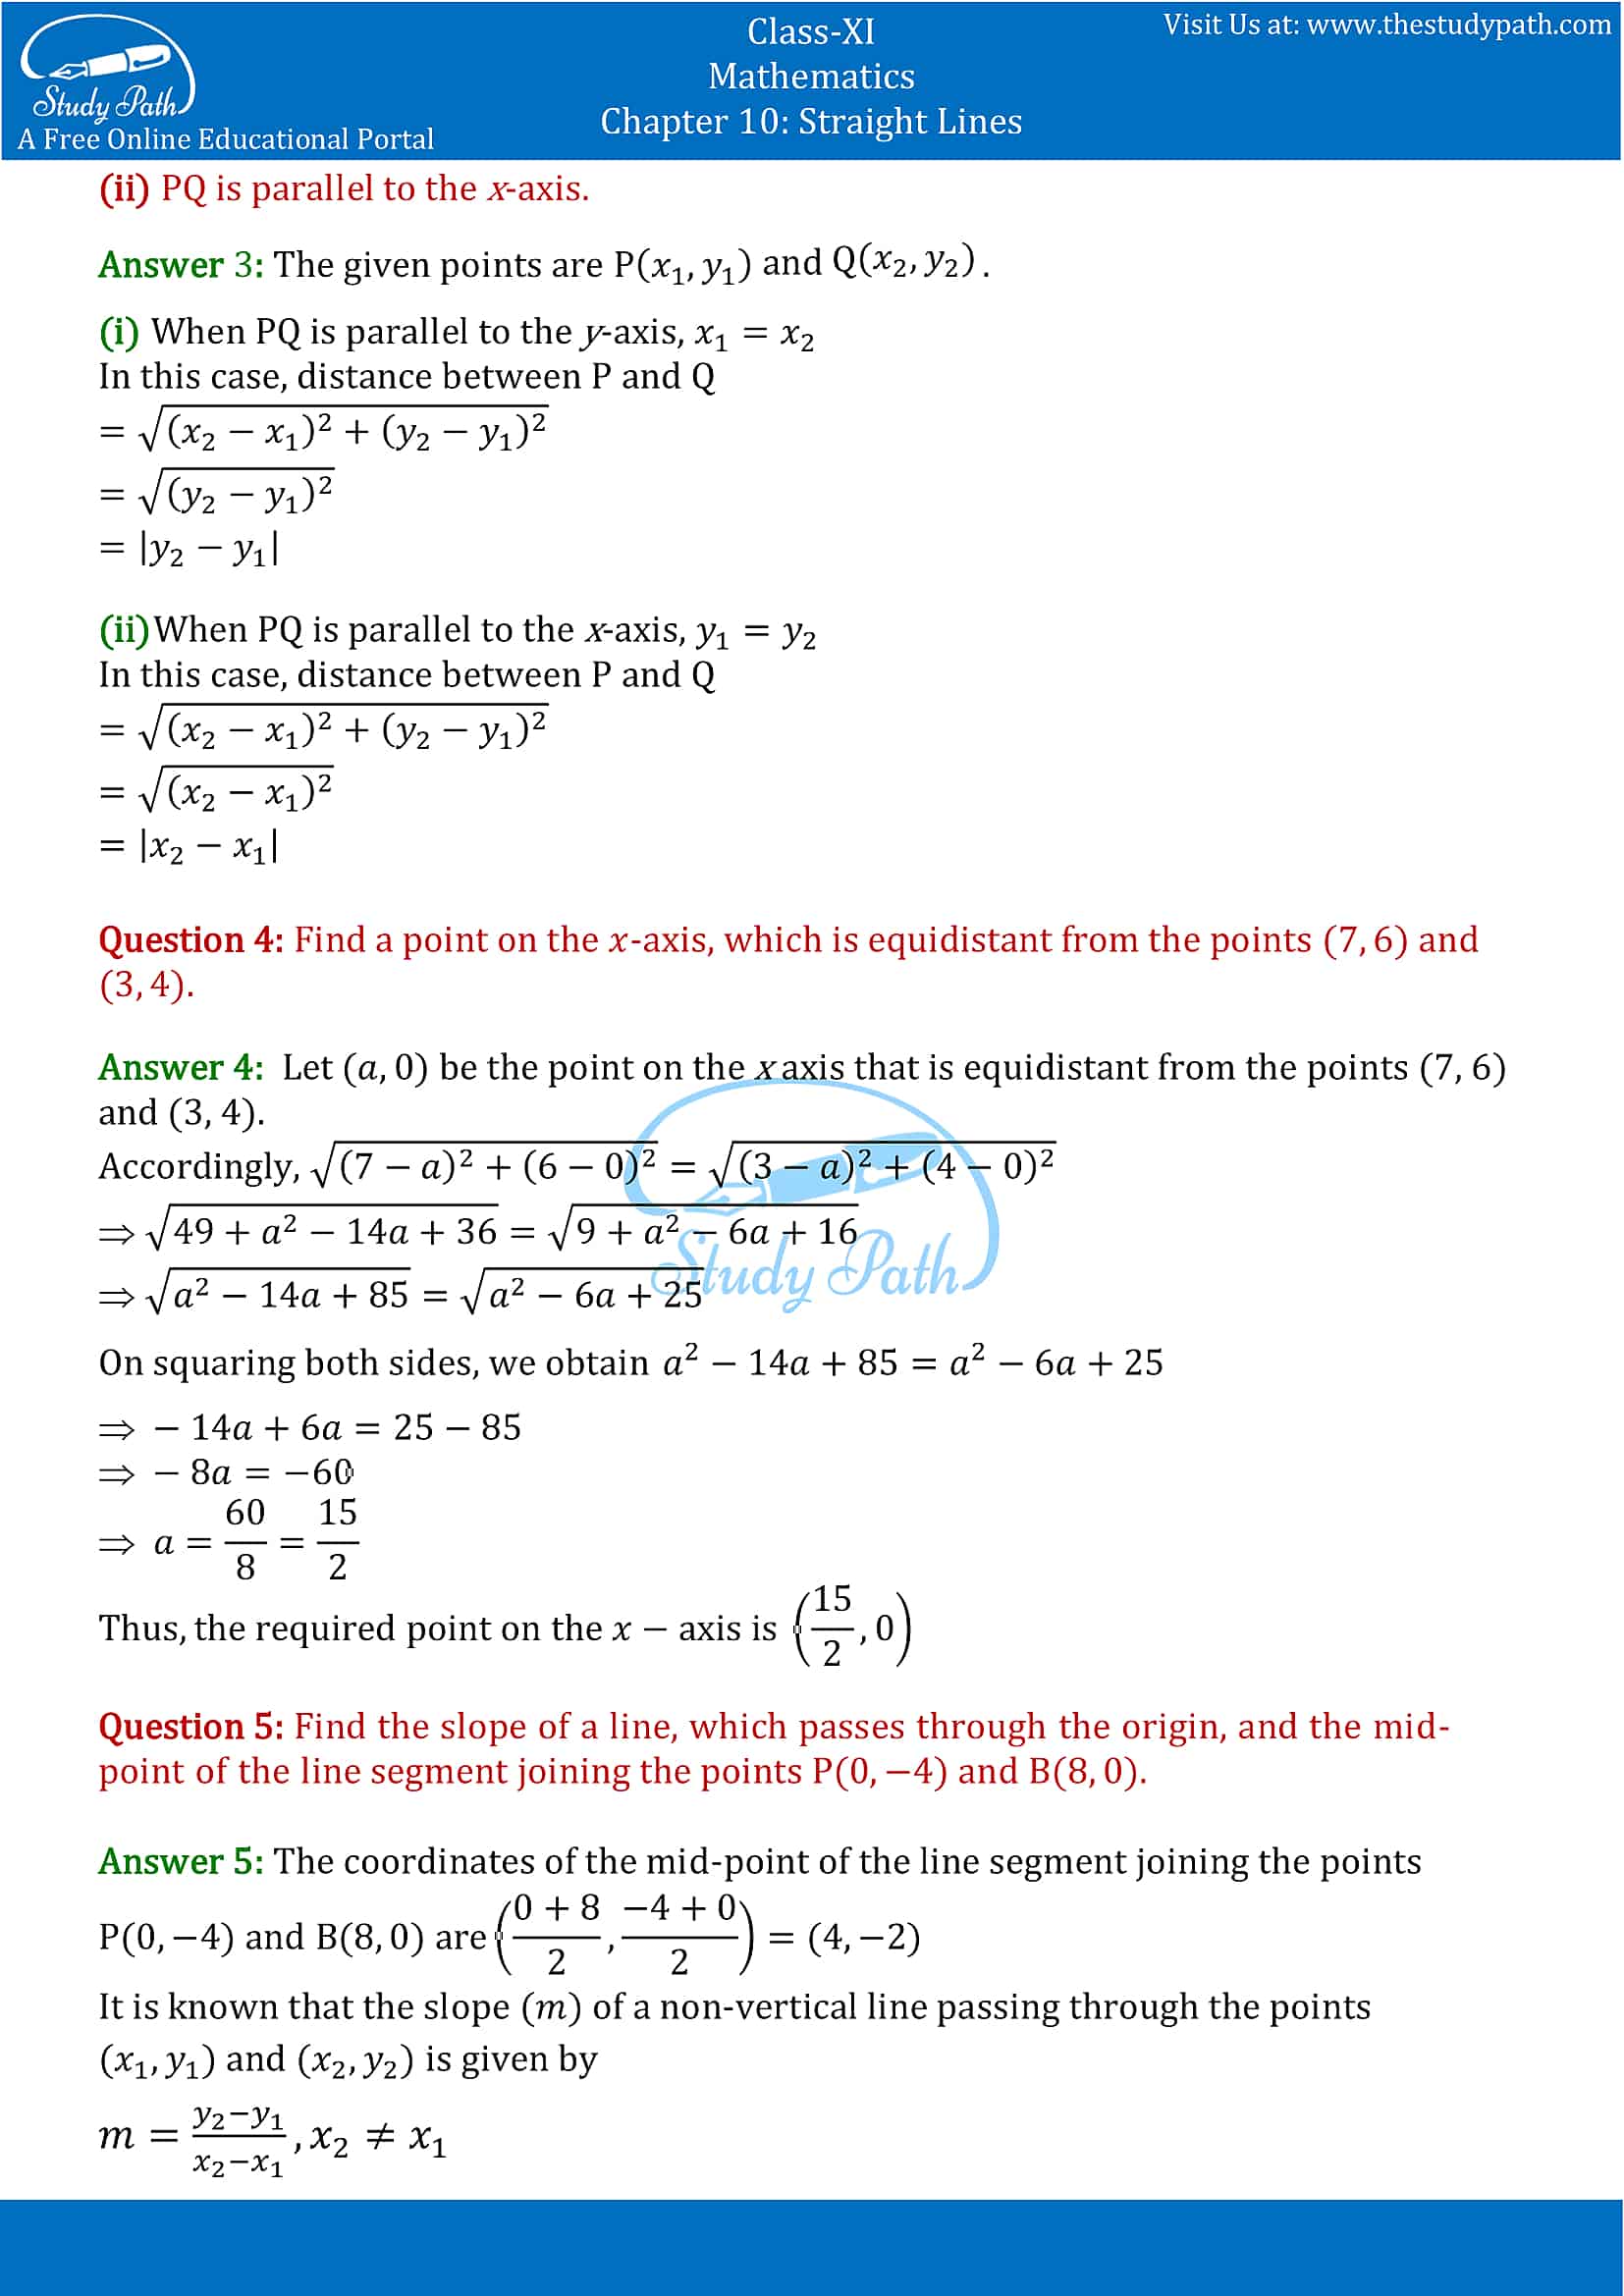 NCERT Solutions for Class 11 Maths chapter 10 Straight Lines Part-3